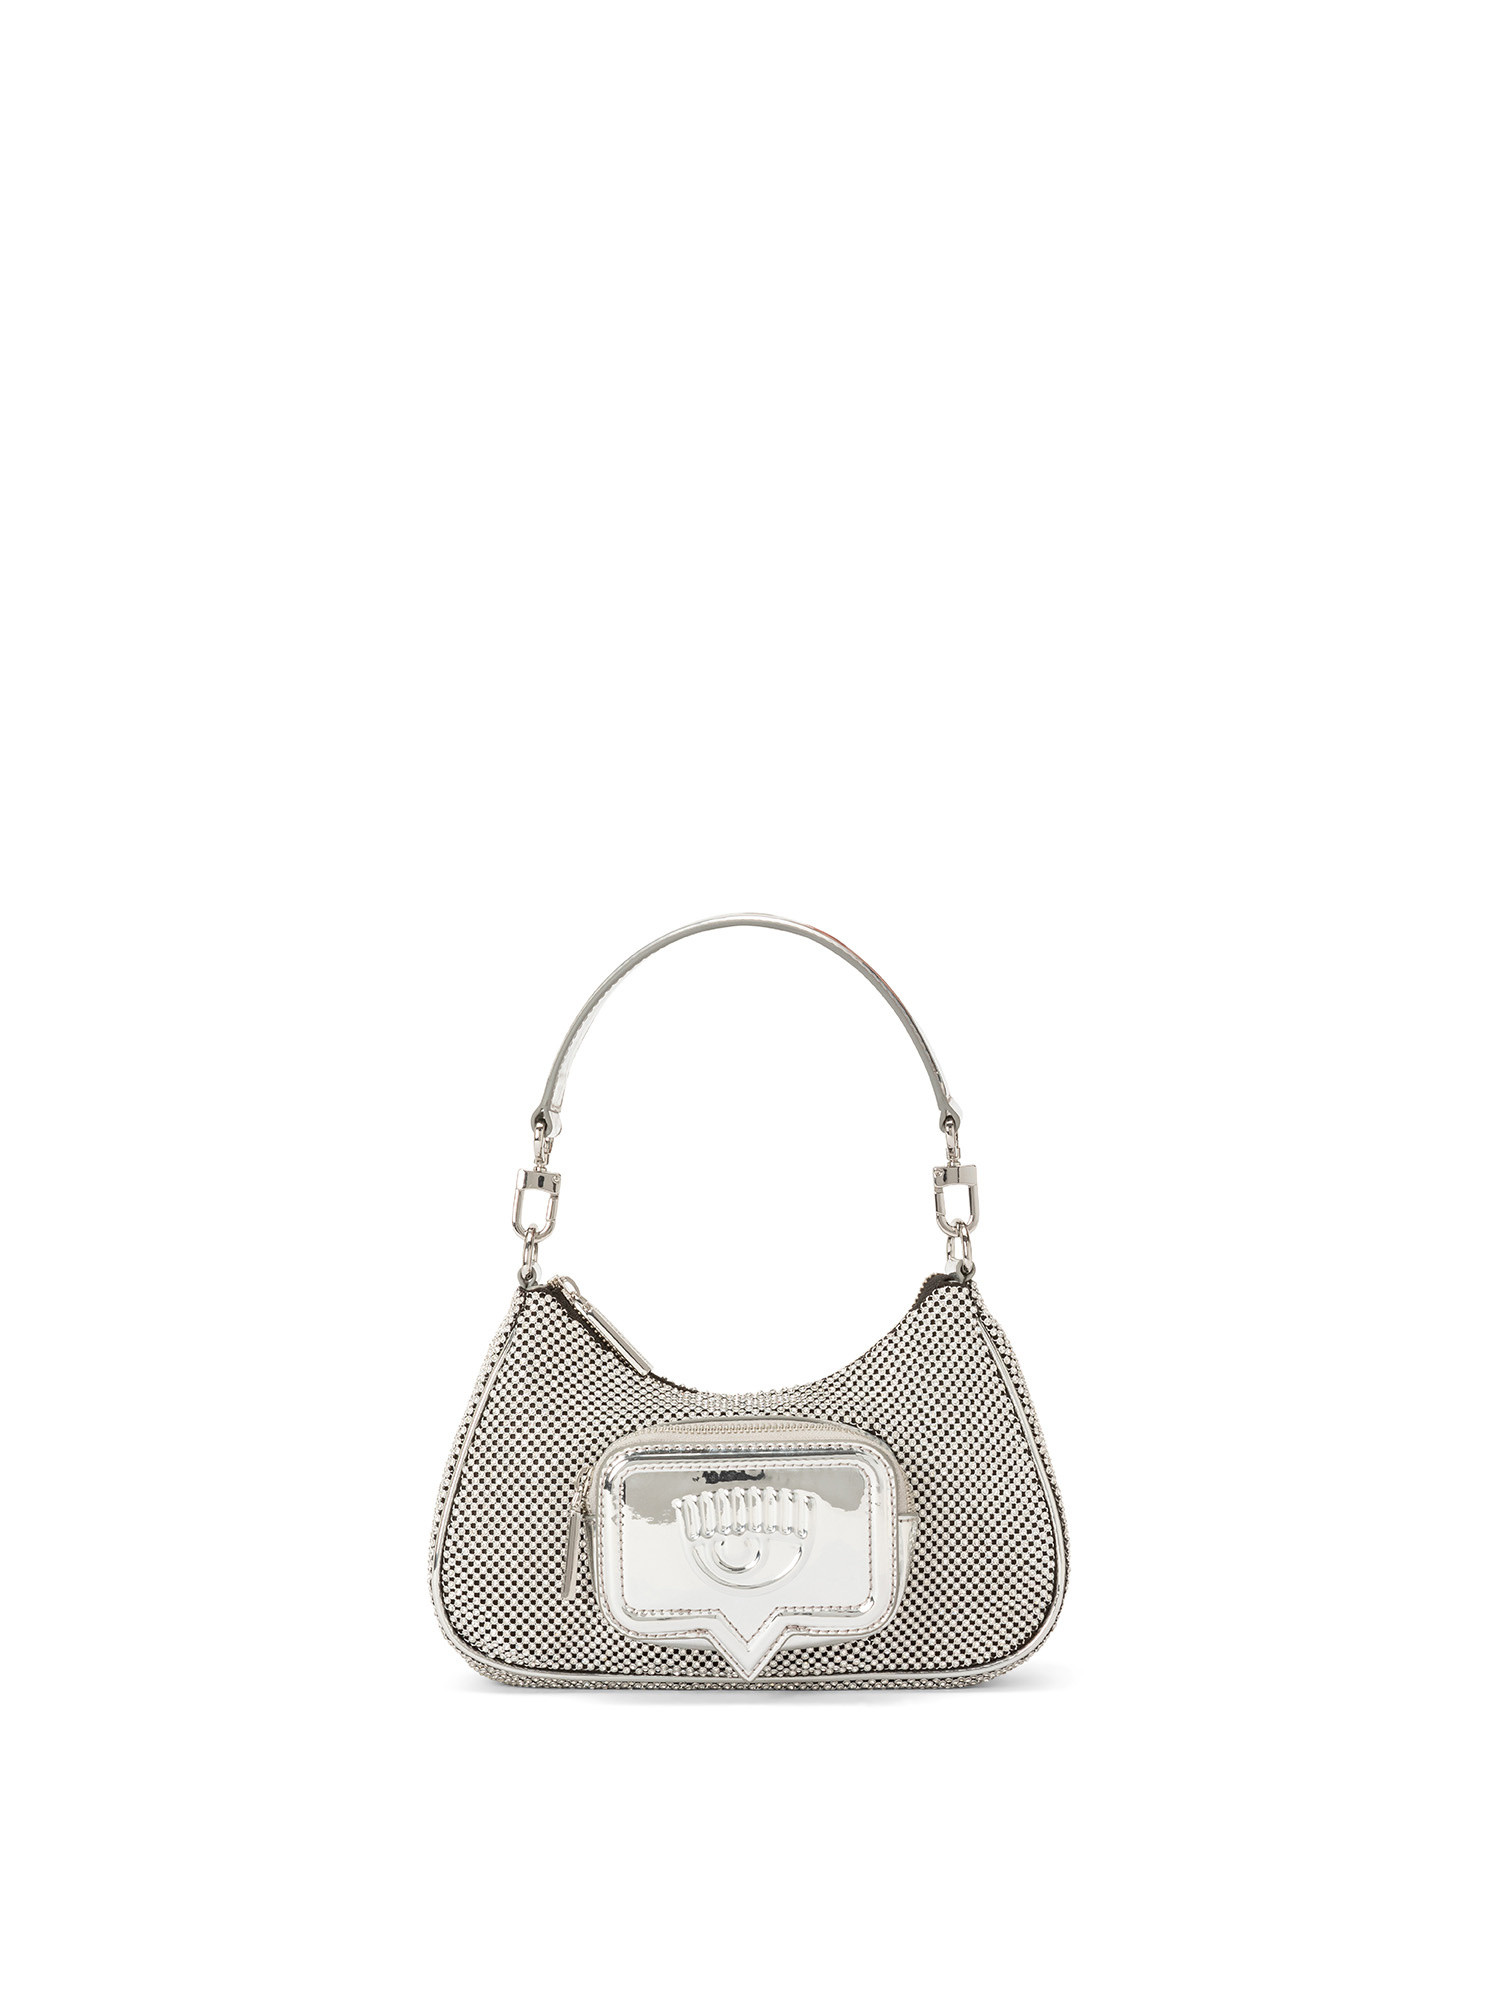 Borsa hobo in strass, Grigio, large image number 0